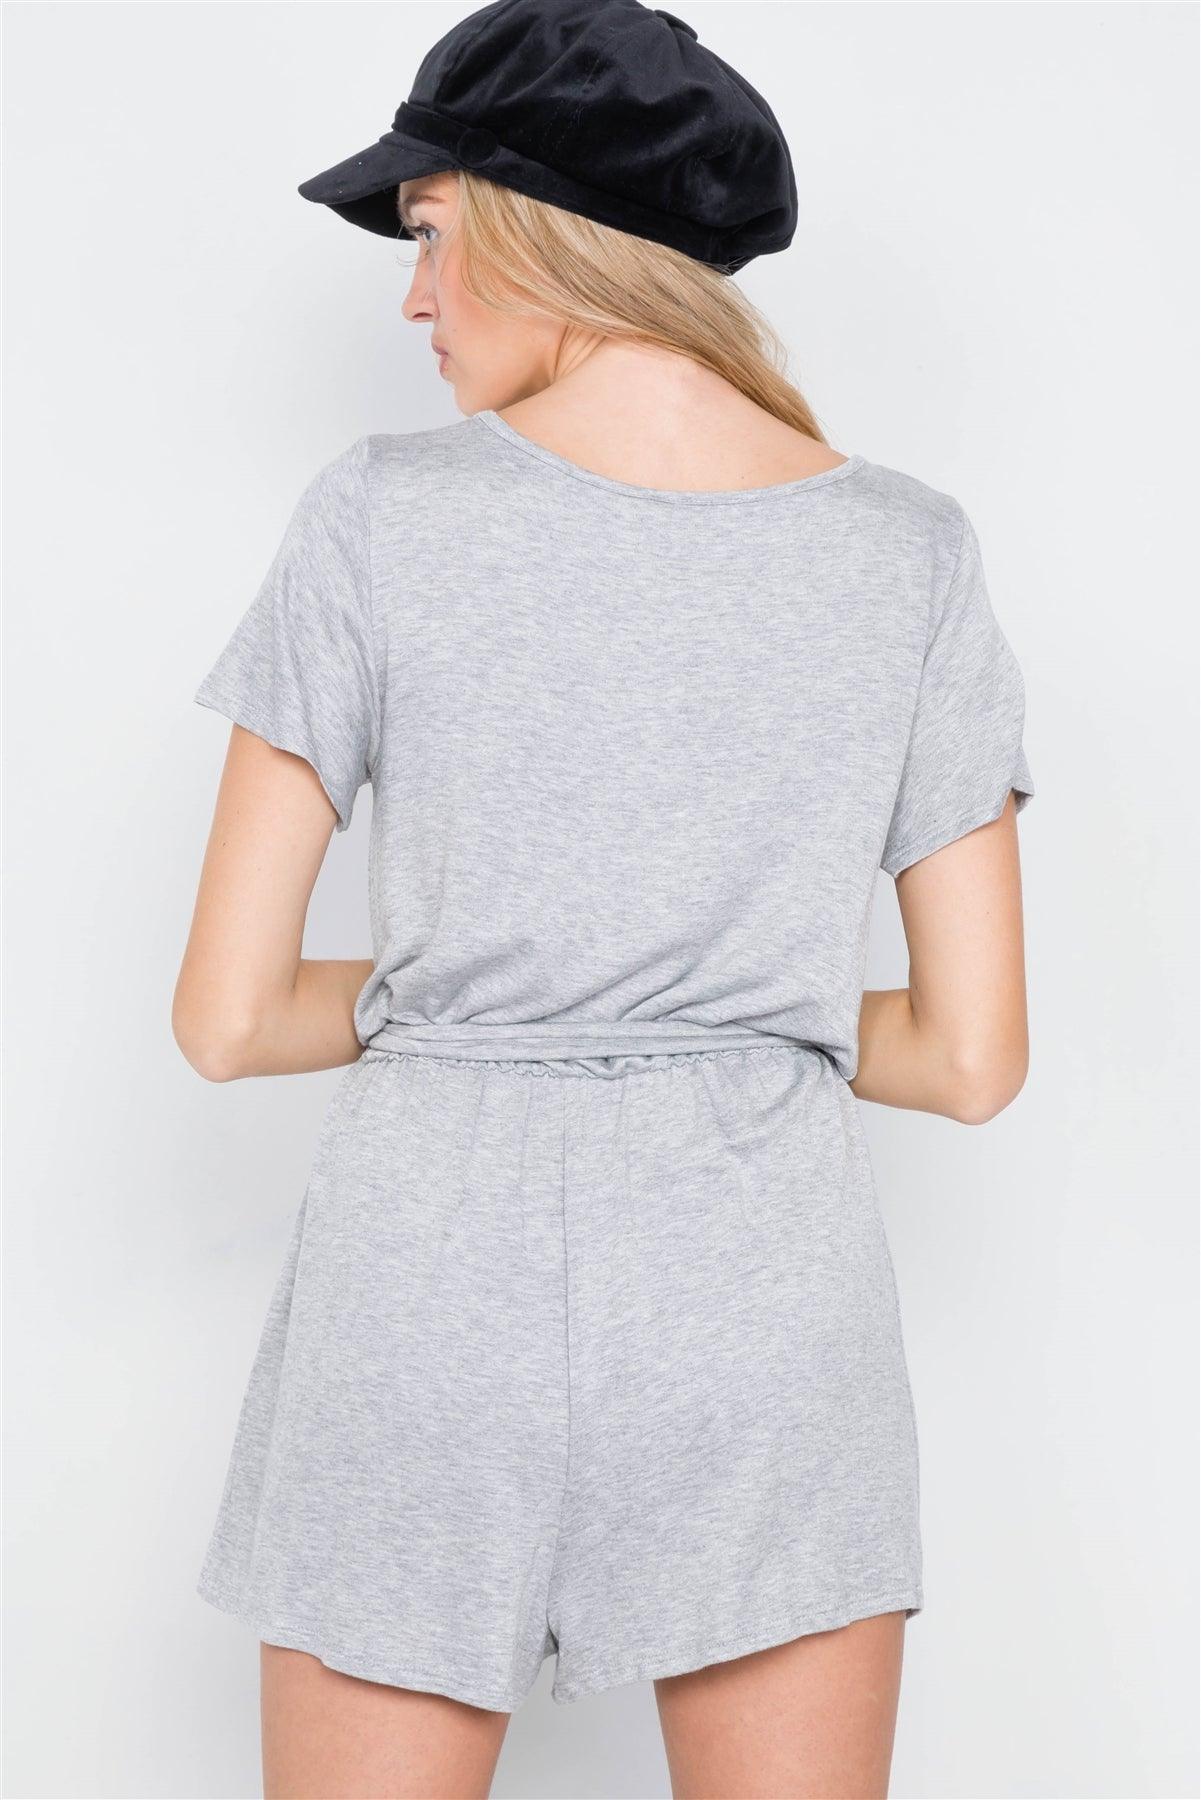 Heather Grey V-Neck Front Roll Knot Jersey Romper